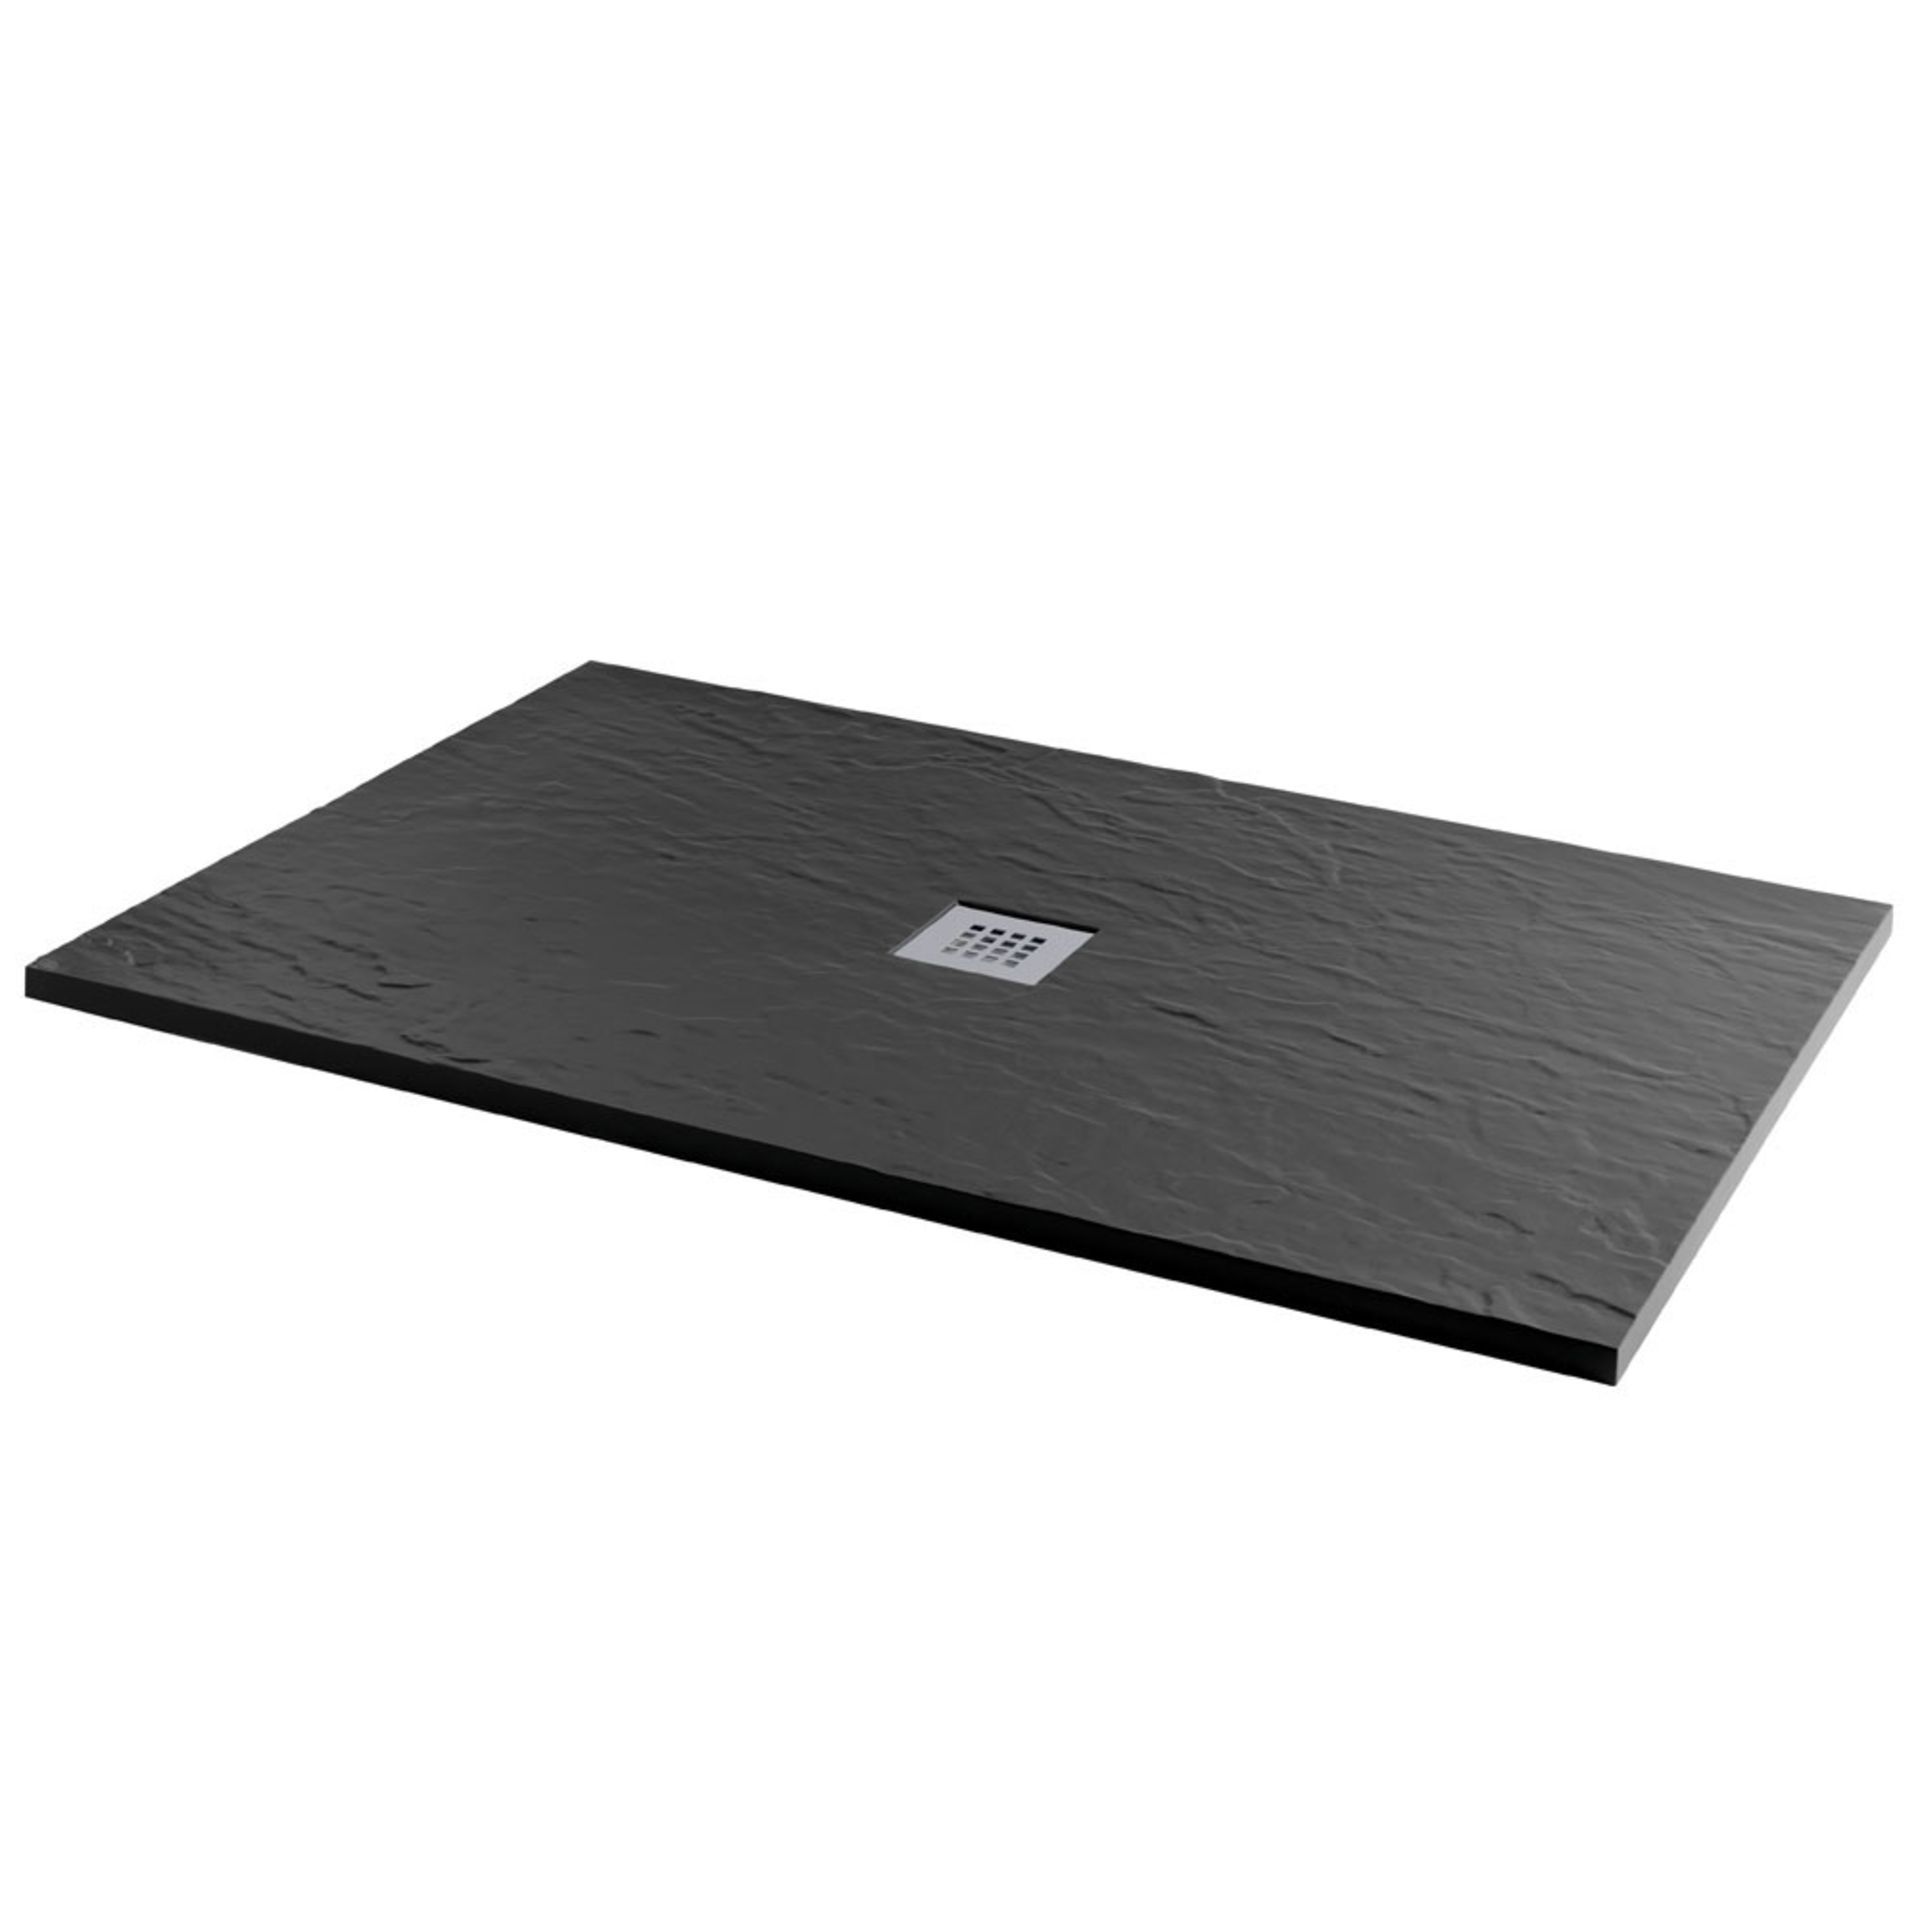 New 1000x800mm Rectangle Black Slate Effect Shower Tray. RRP £569.99.A Textured Black Slate Ef... - Image 2 of 2